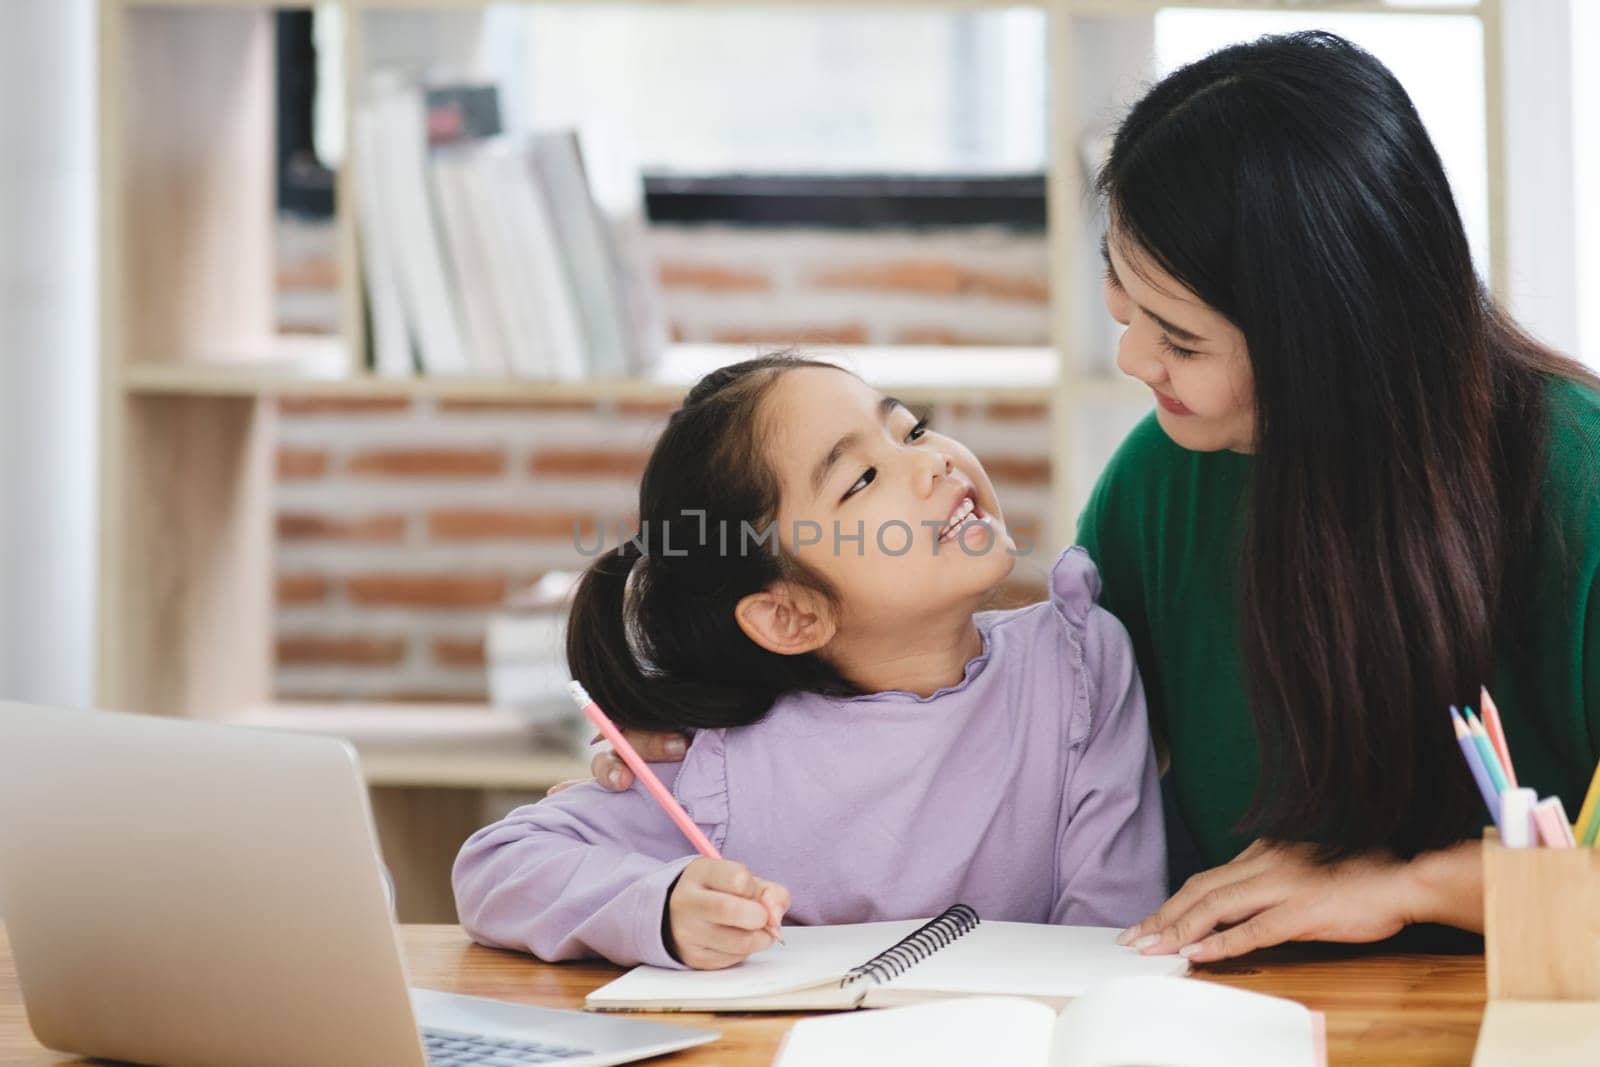 A woman is helping a young girl with her homework. The girl is wearing a purple shirt and is sitting at a desk with a laptop and a notebook. The woman is holding the girl's hand